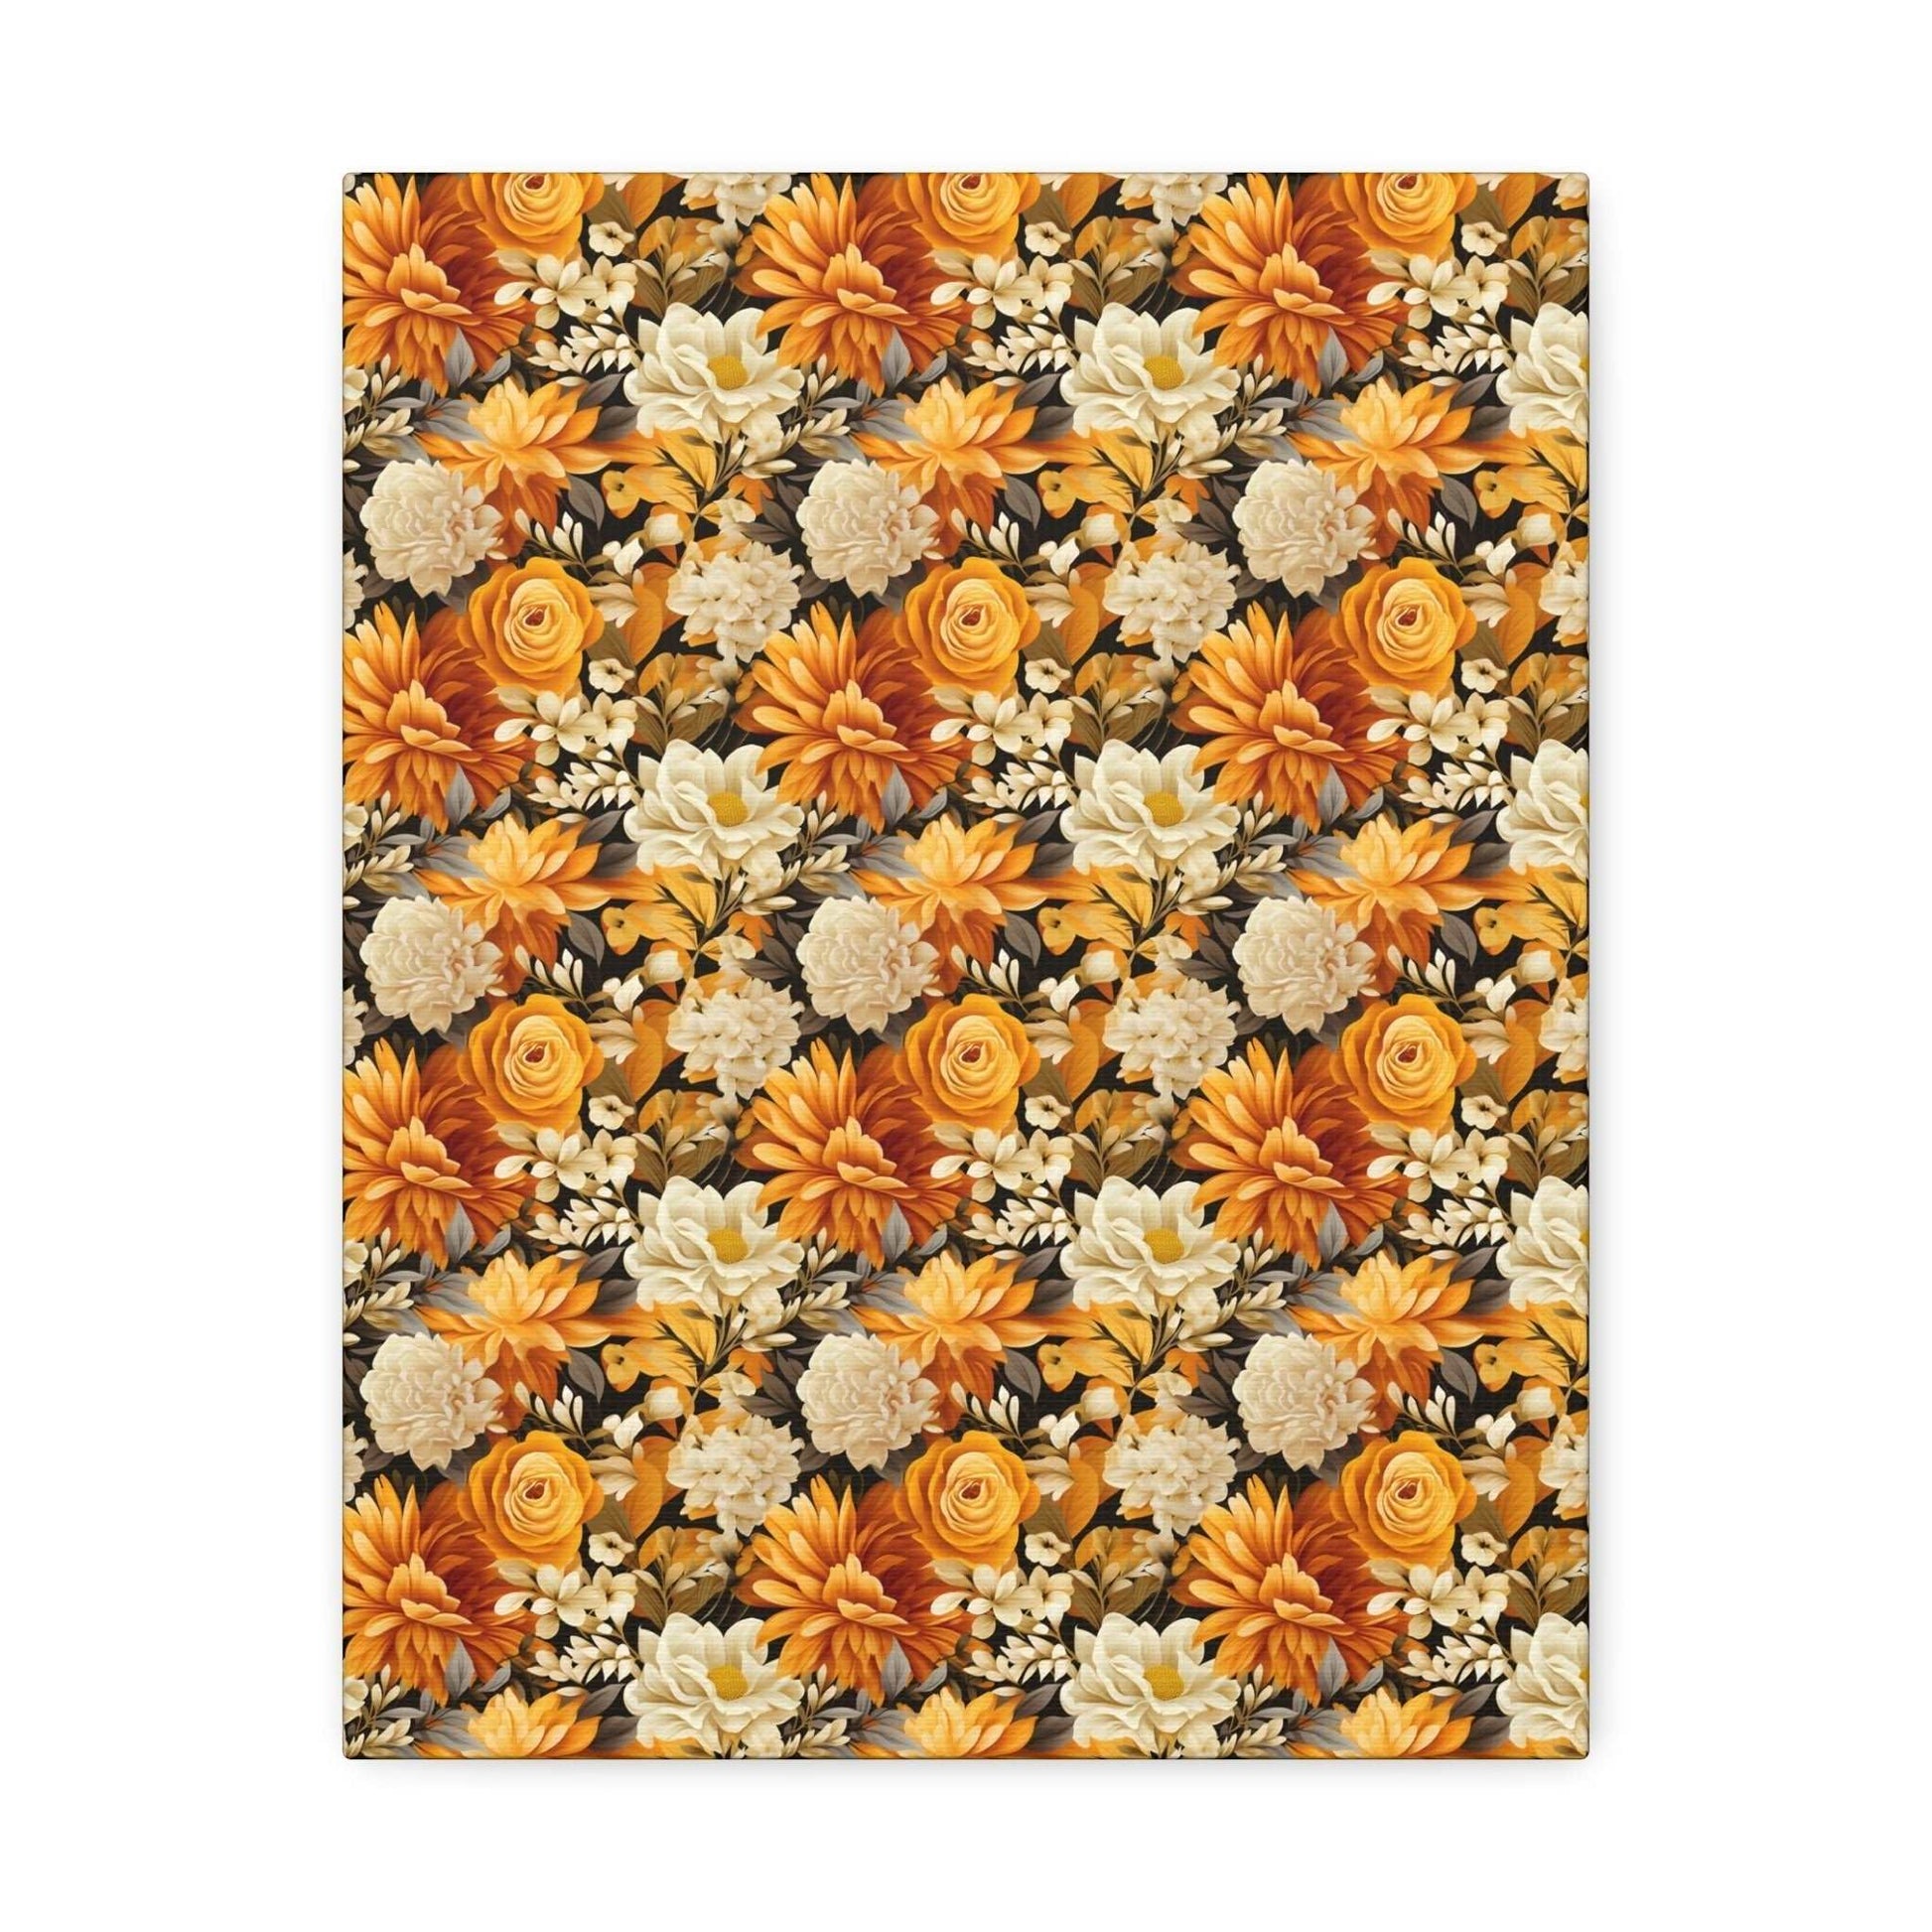 Autumnal Romance: Golden and White Blossoms on Black - Satin Canvas, Stretched - Pattern Symphony